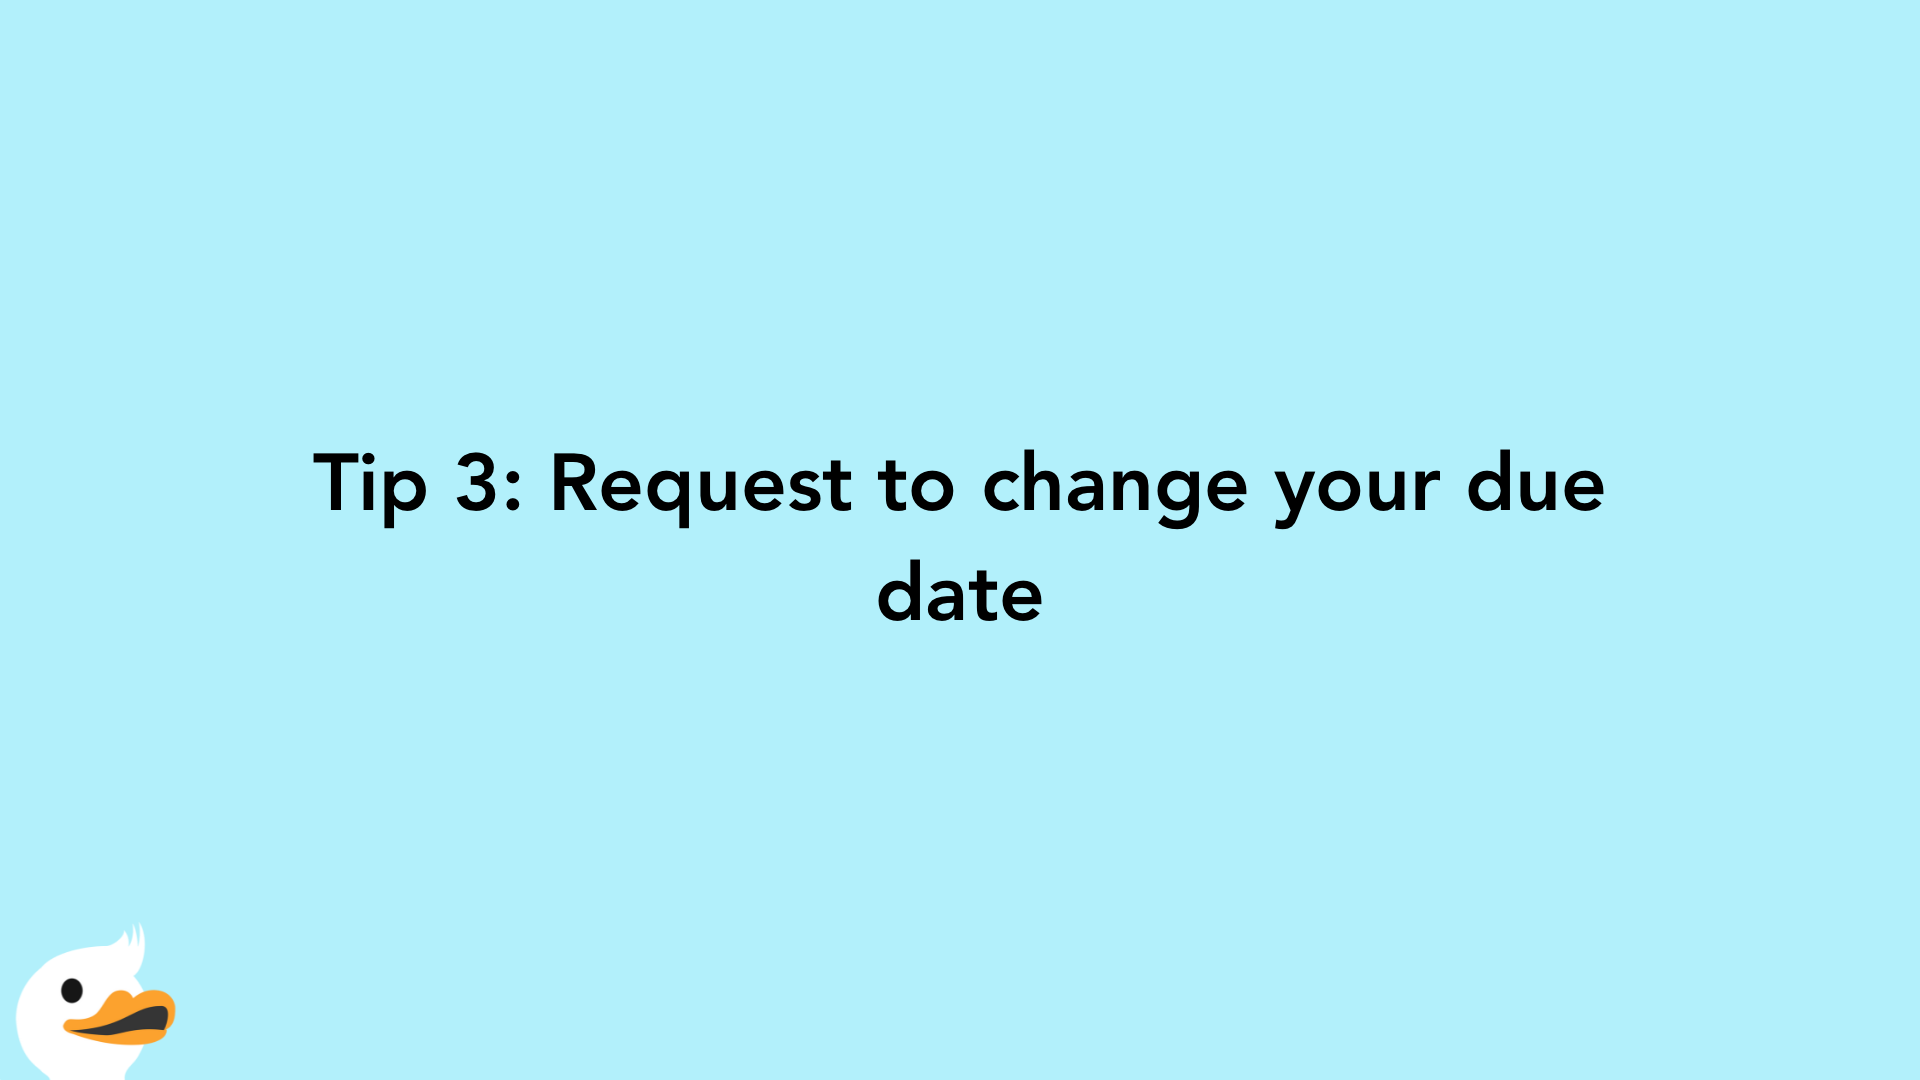 Tip 3: Request to change your due date